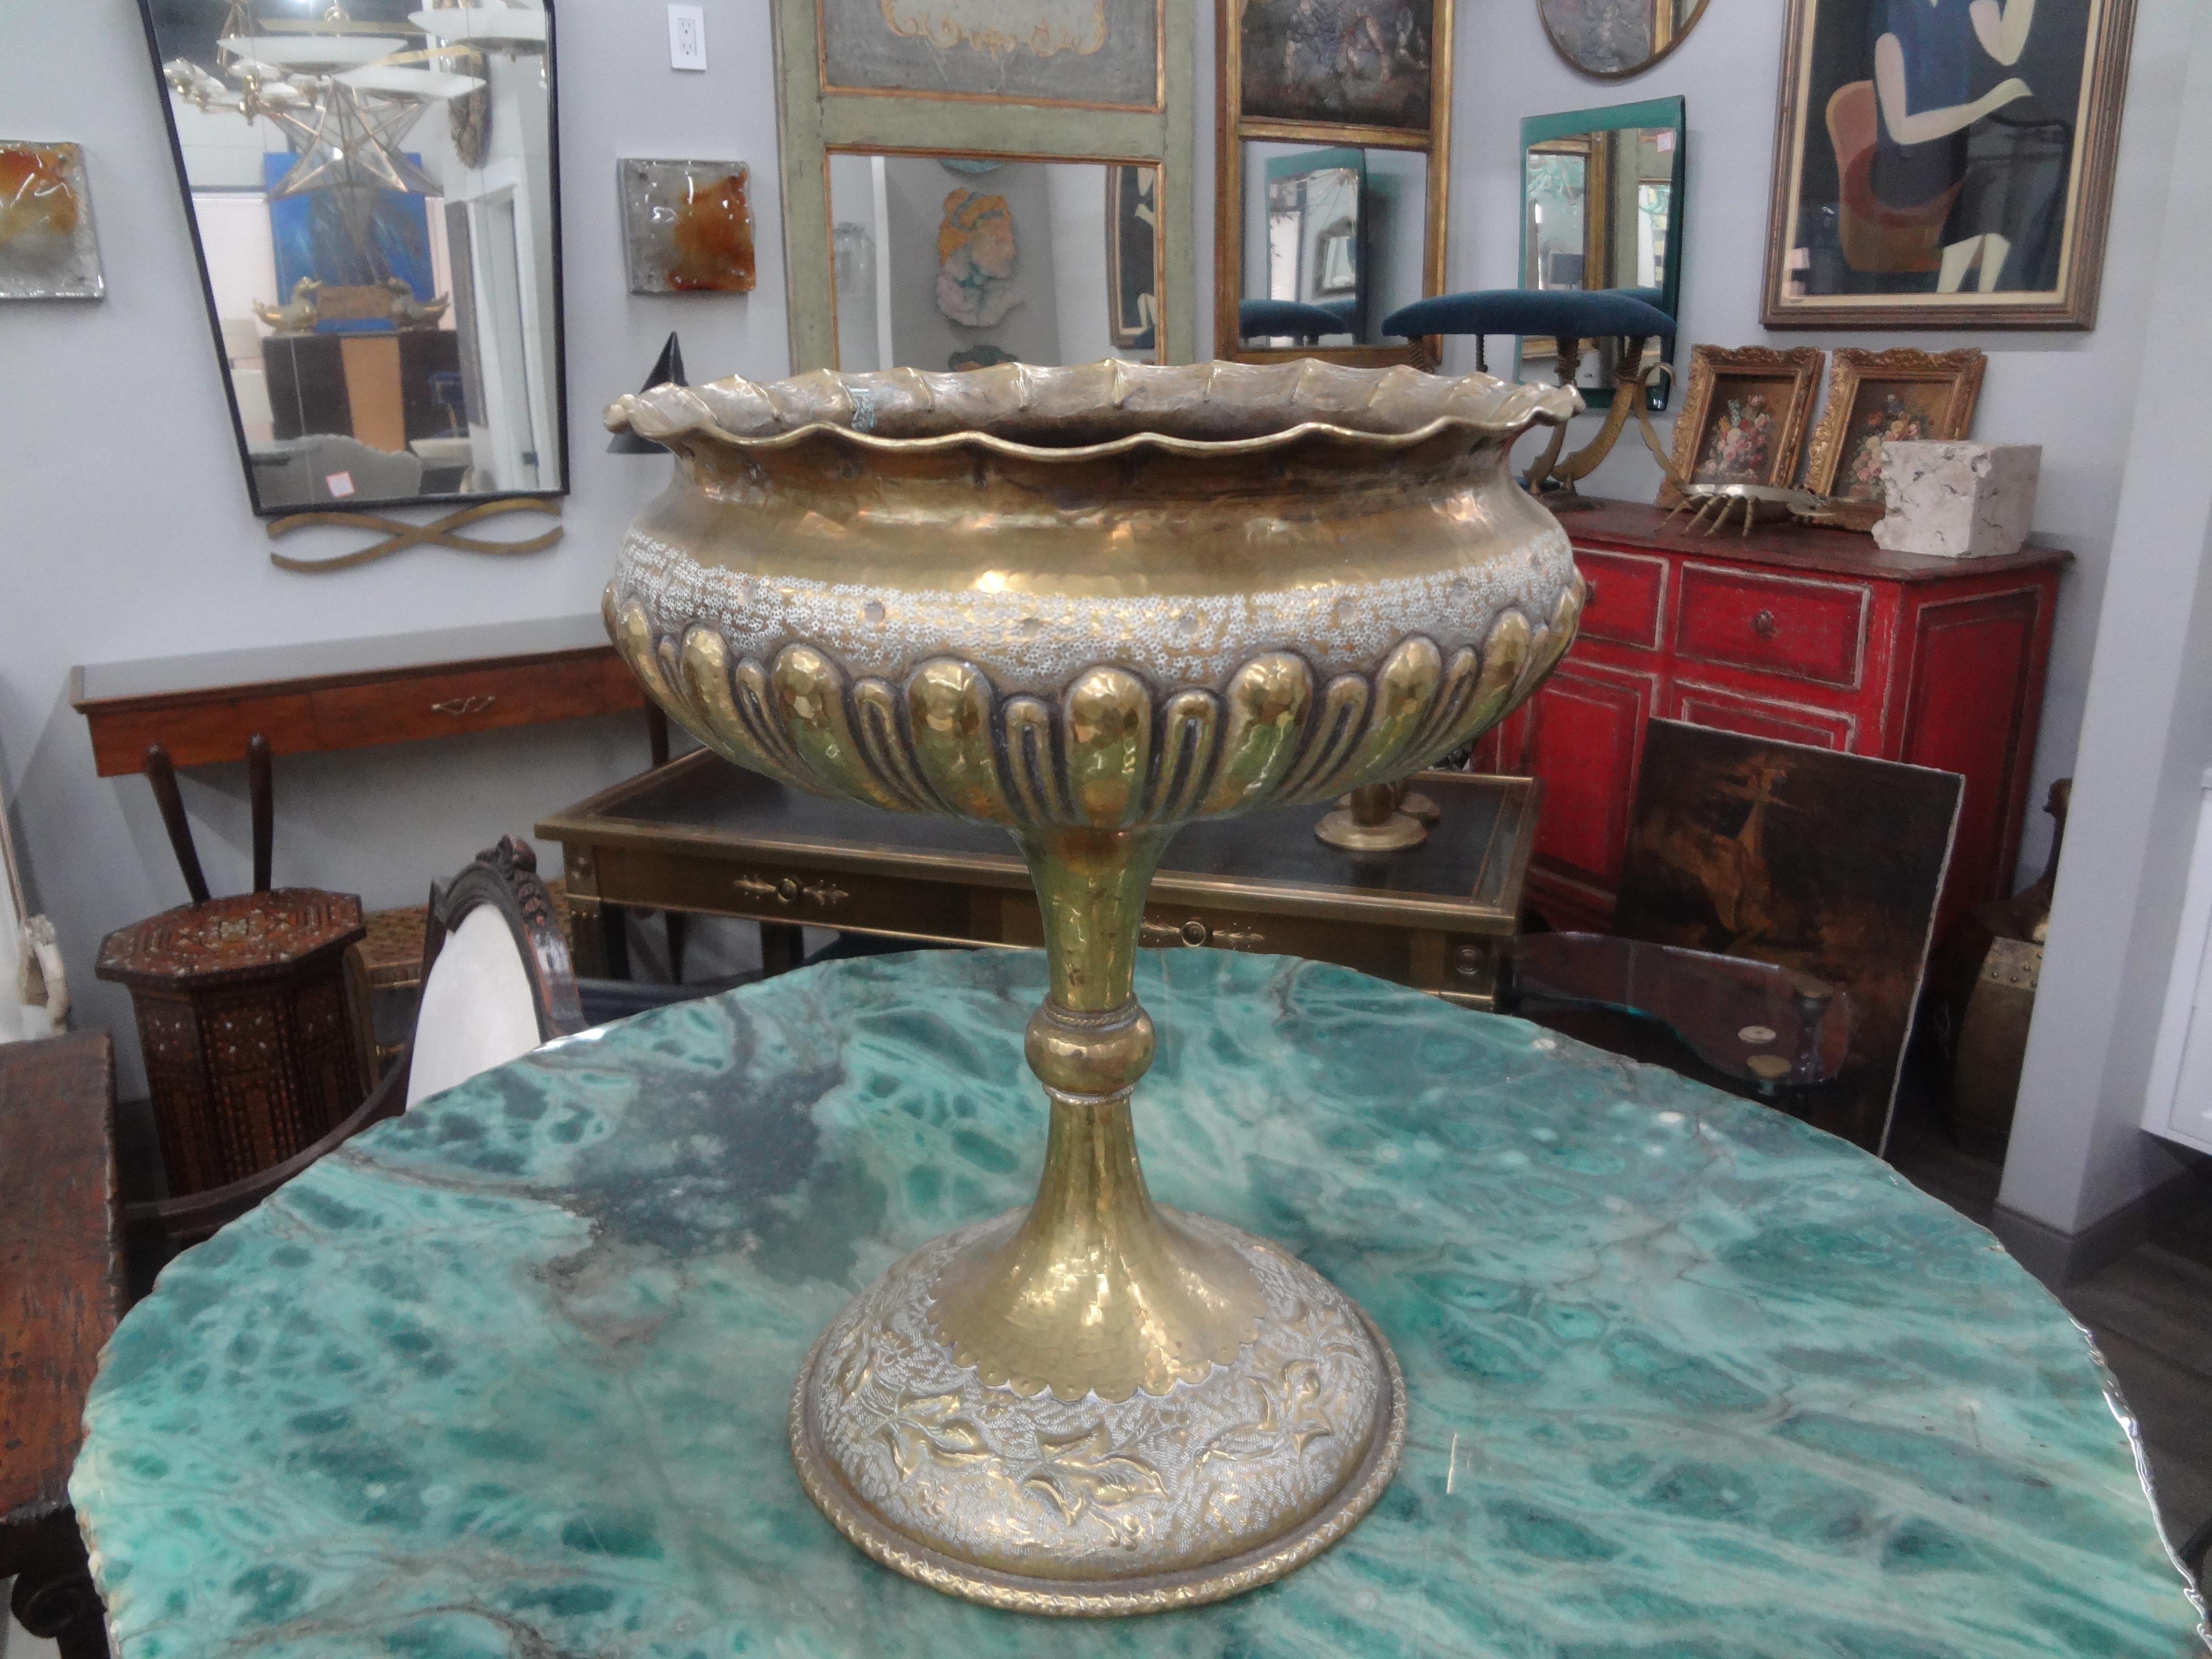 Italian Hammered Brass Urn Or Vessel.
Stunning Italian Art Deco hammered brass urn or vessel.
We have two other similar urns offered on 1stdibs.
To see all our offerings on 1stdibs, we are 
Kirby Antiques
Houston, Texas